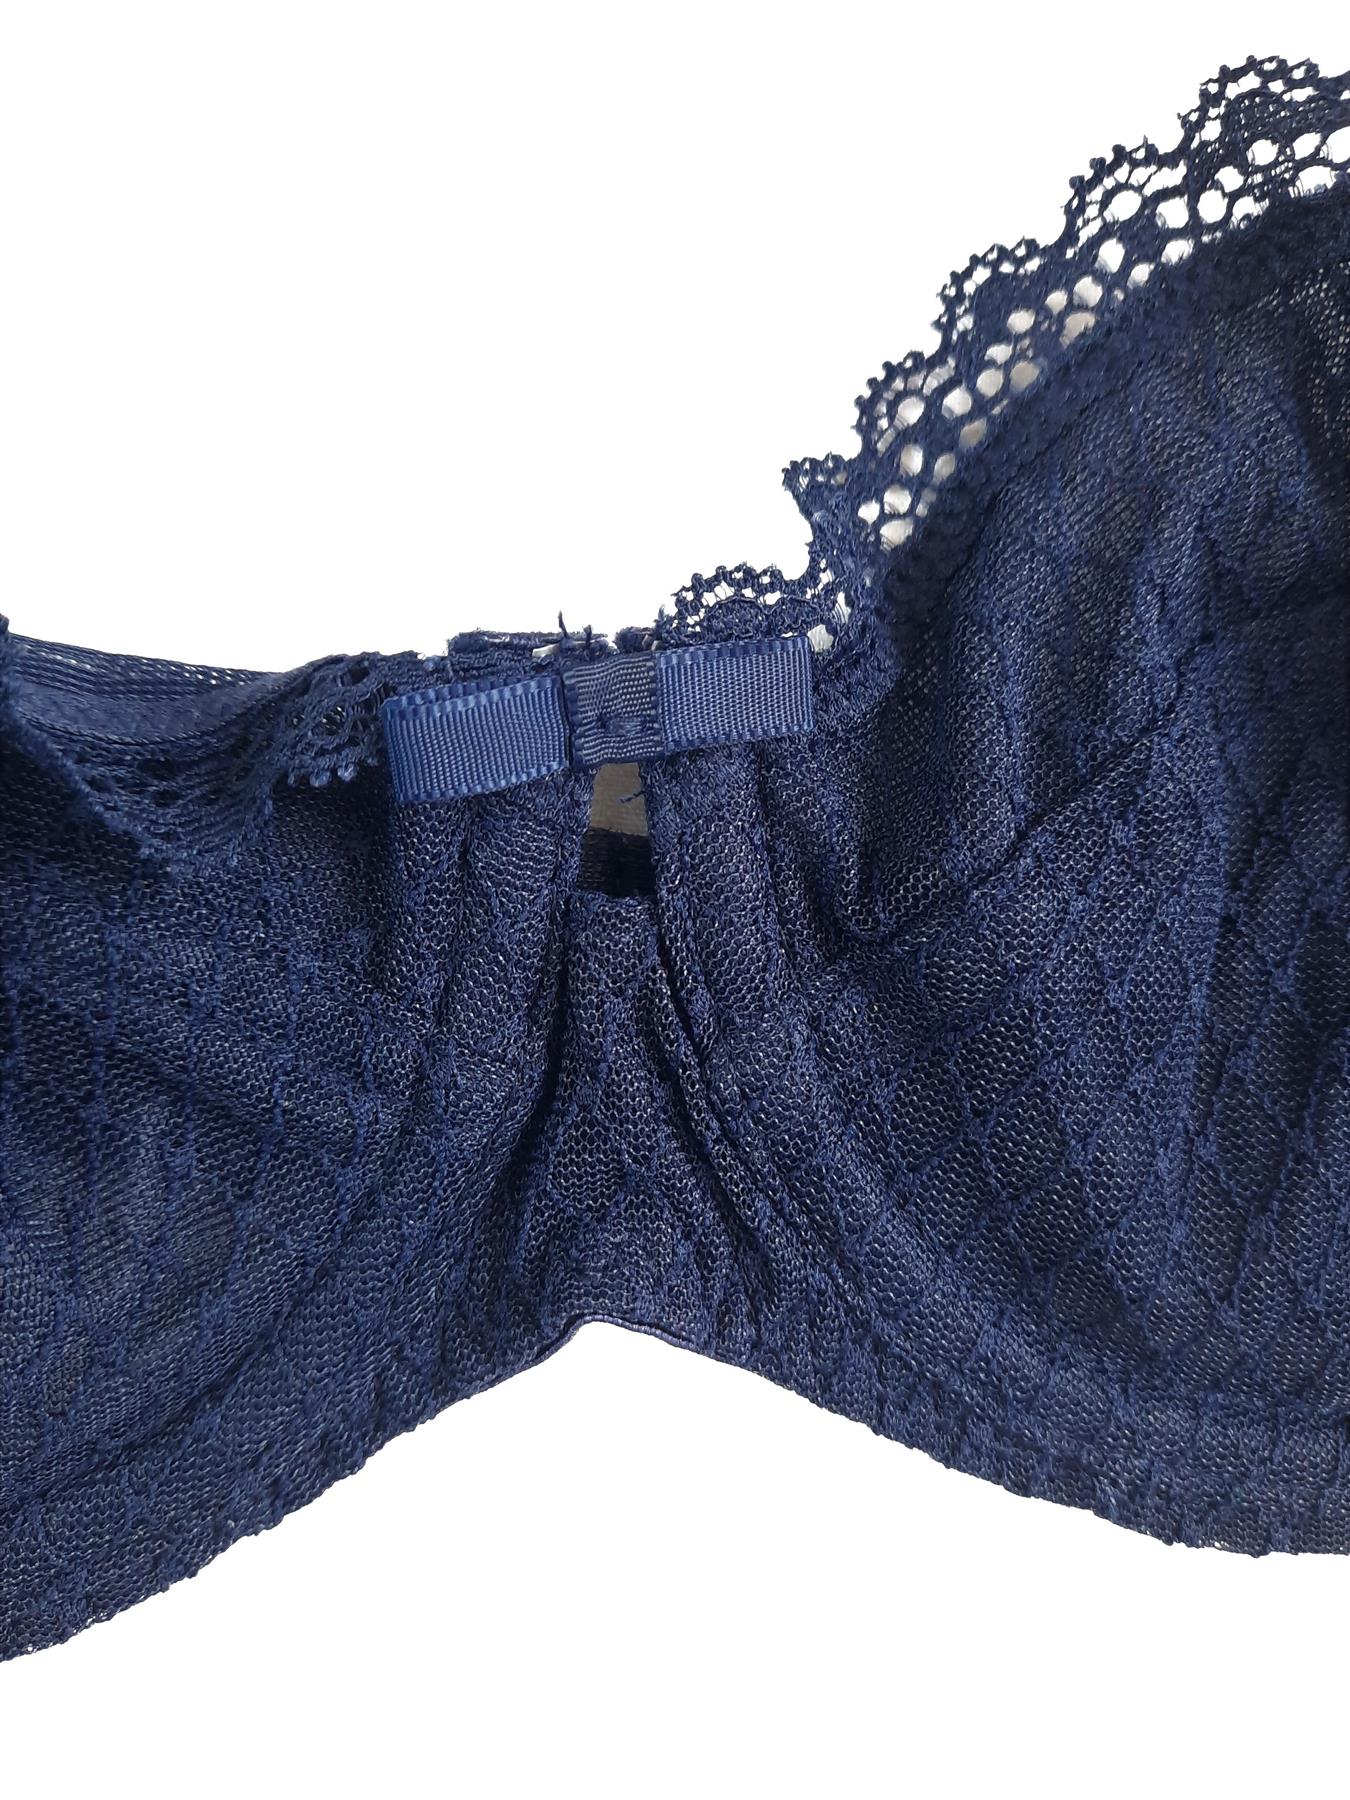 Ex Chainstore Lace Bra Underwired Non-Padded Navy High Street Brand New